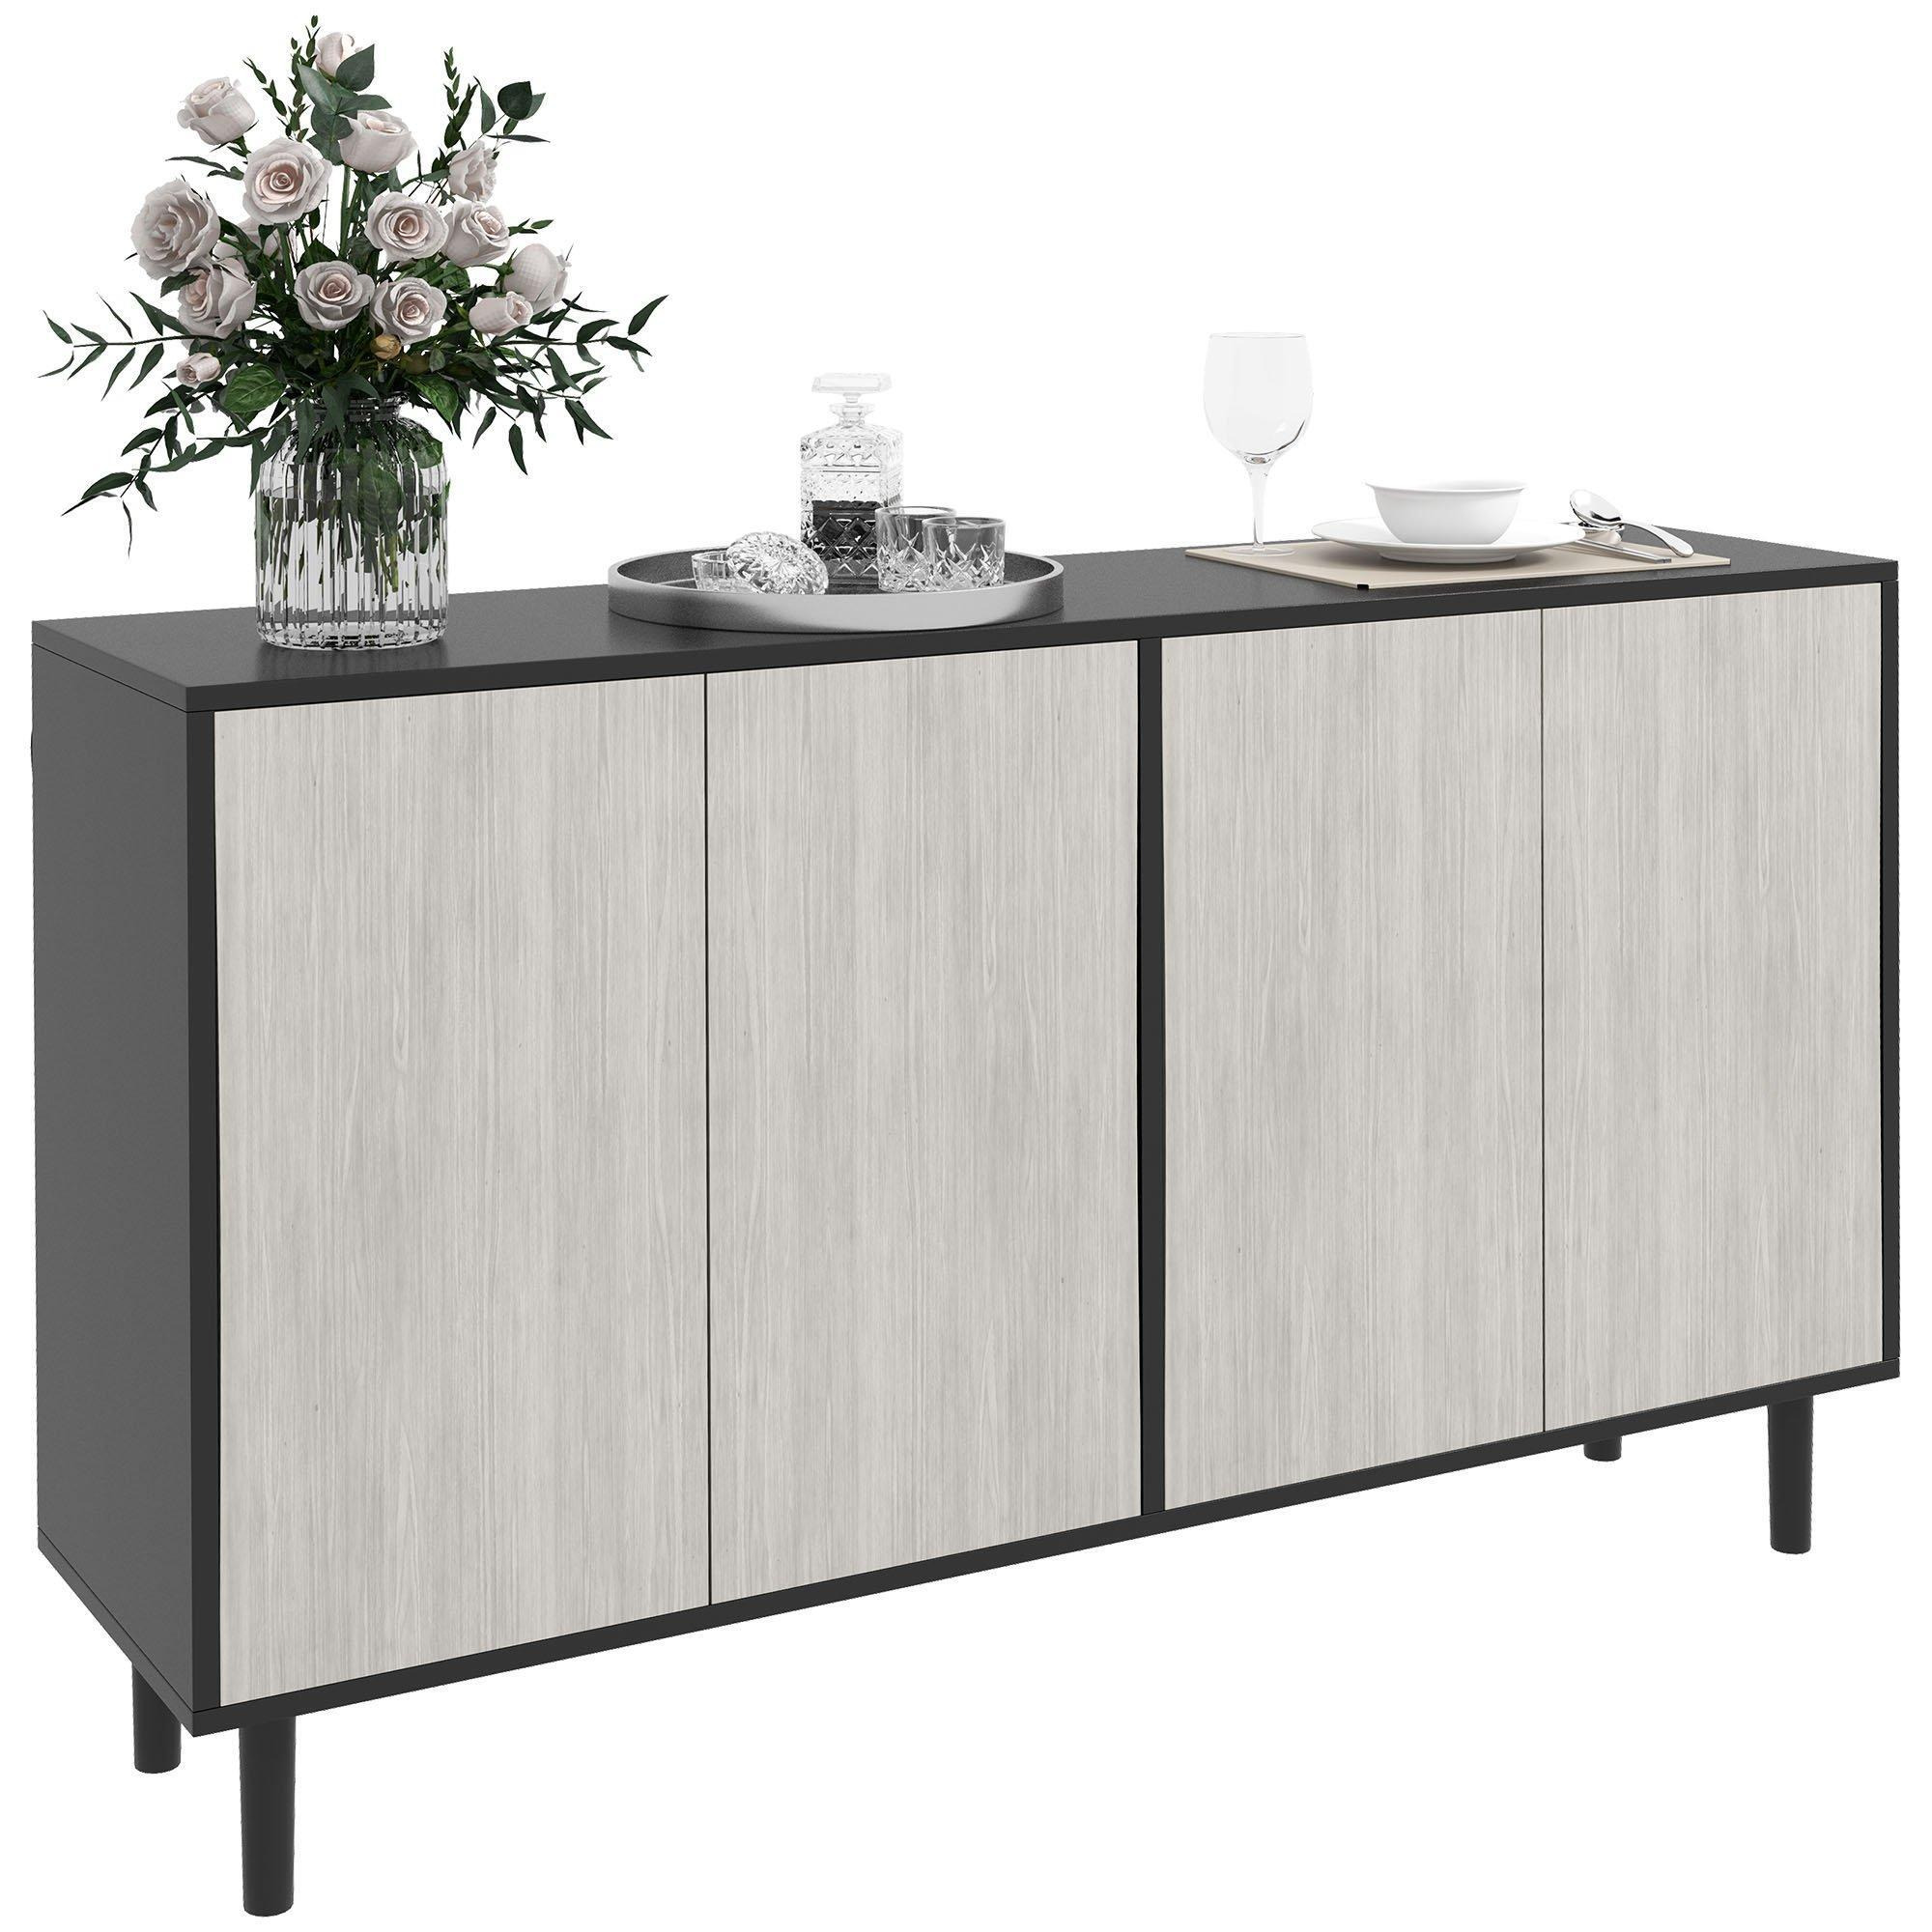 Sideboard Kitchen Storage Cabinet with 2 Cupboards Solid Wood Legs - image 1